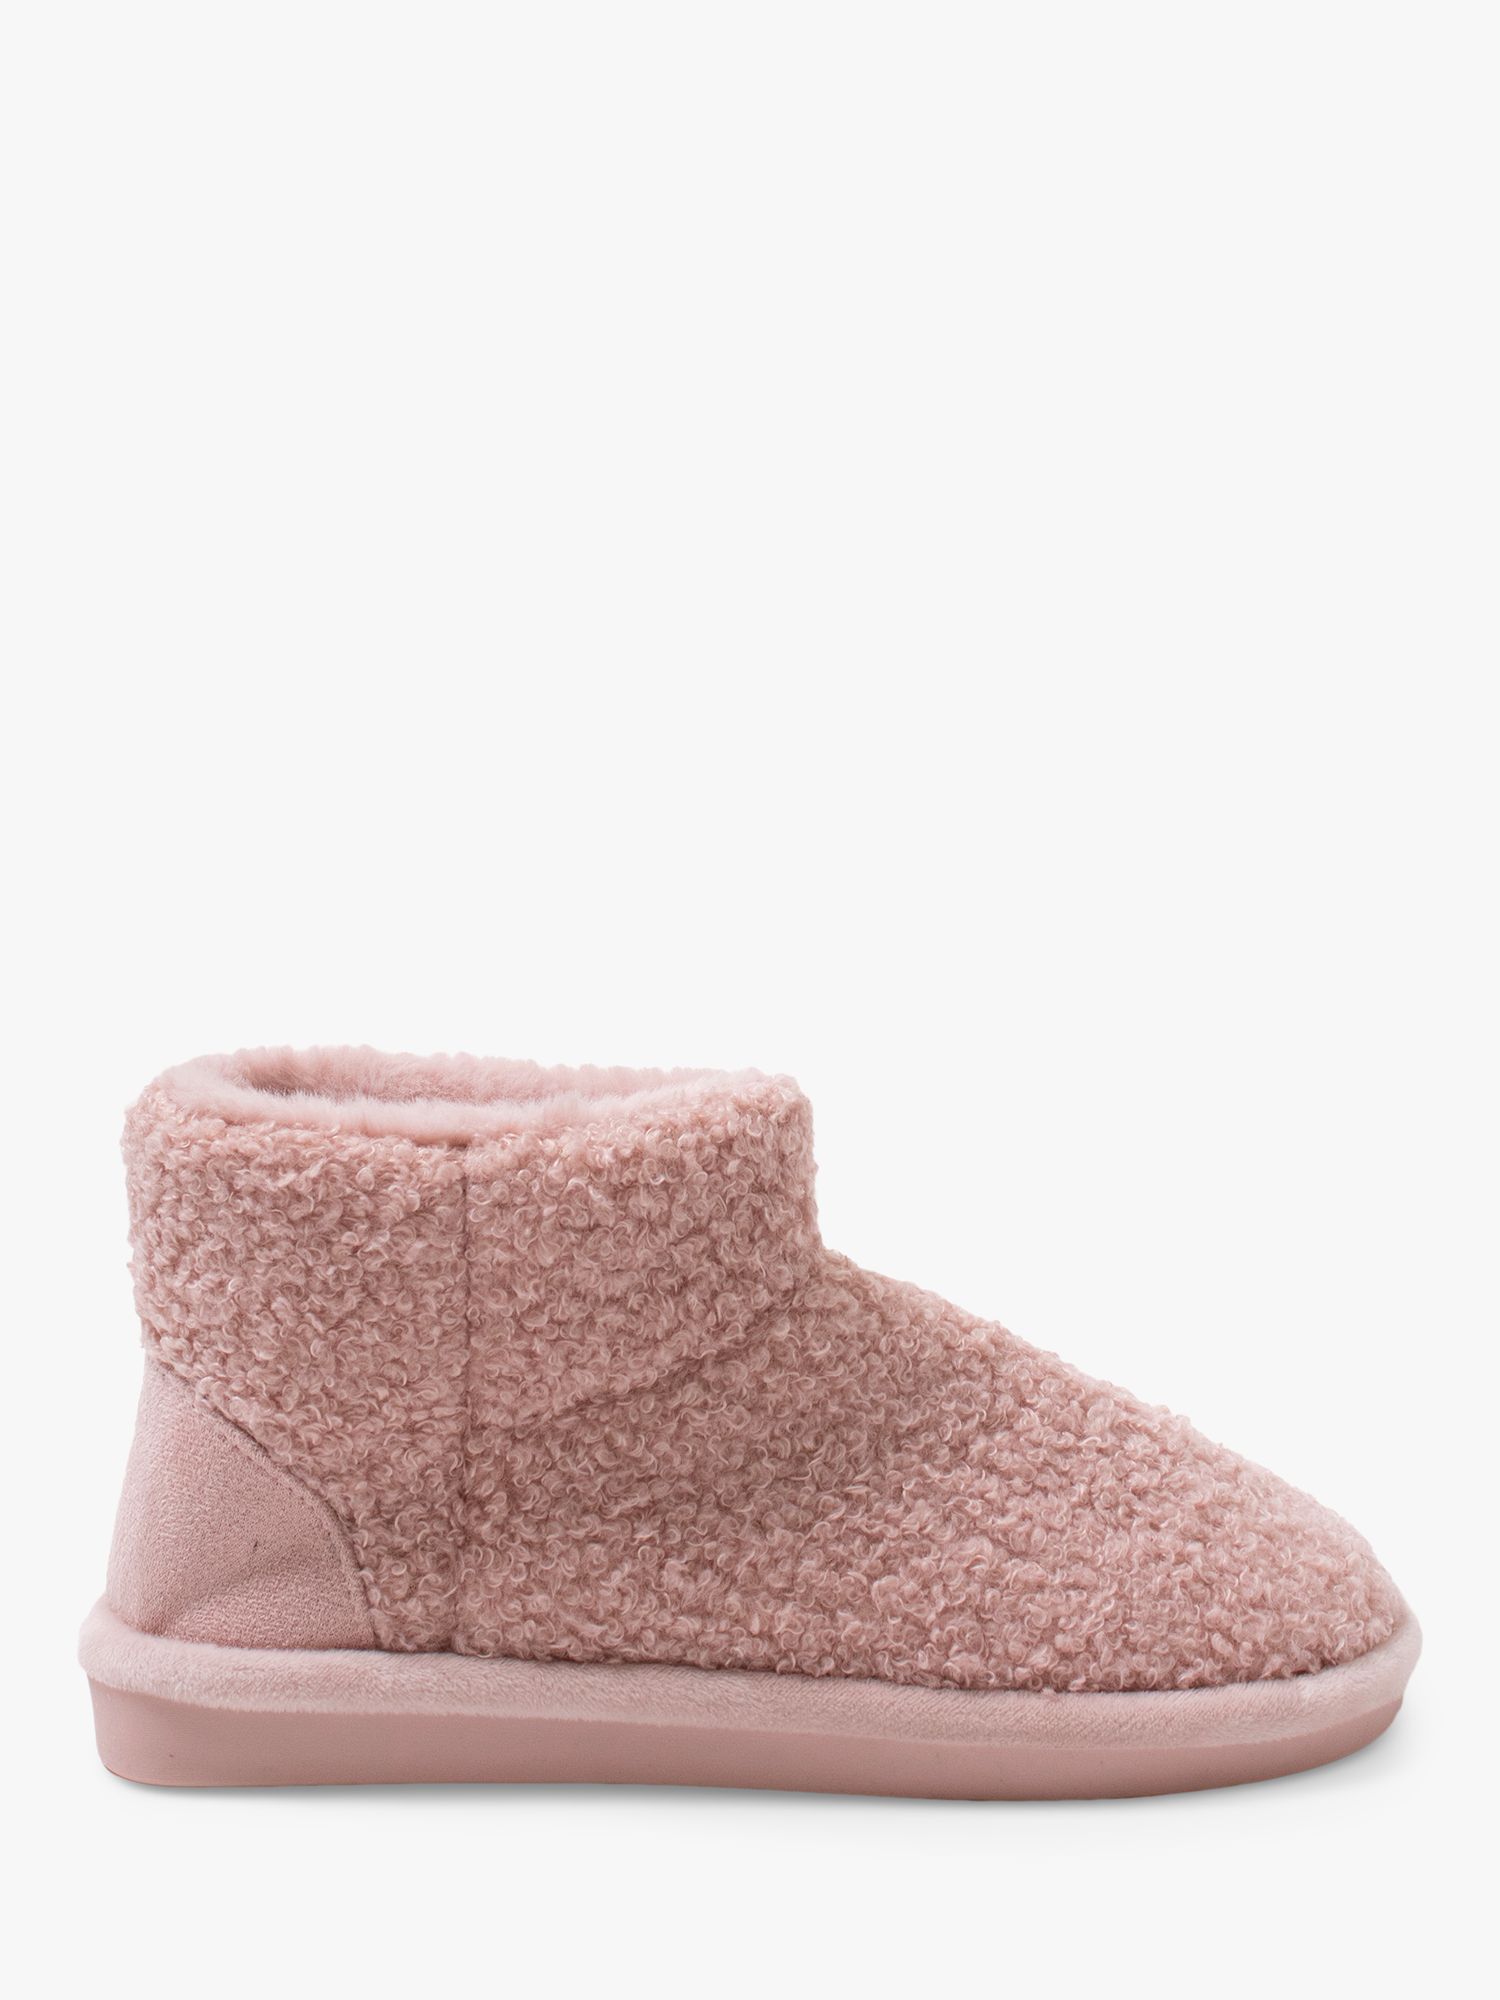 Buy Pretty You London Georgie Slipper Boots Online at johnlewis.com